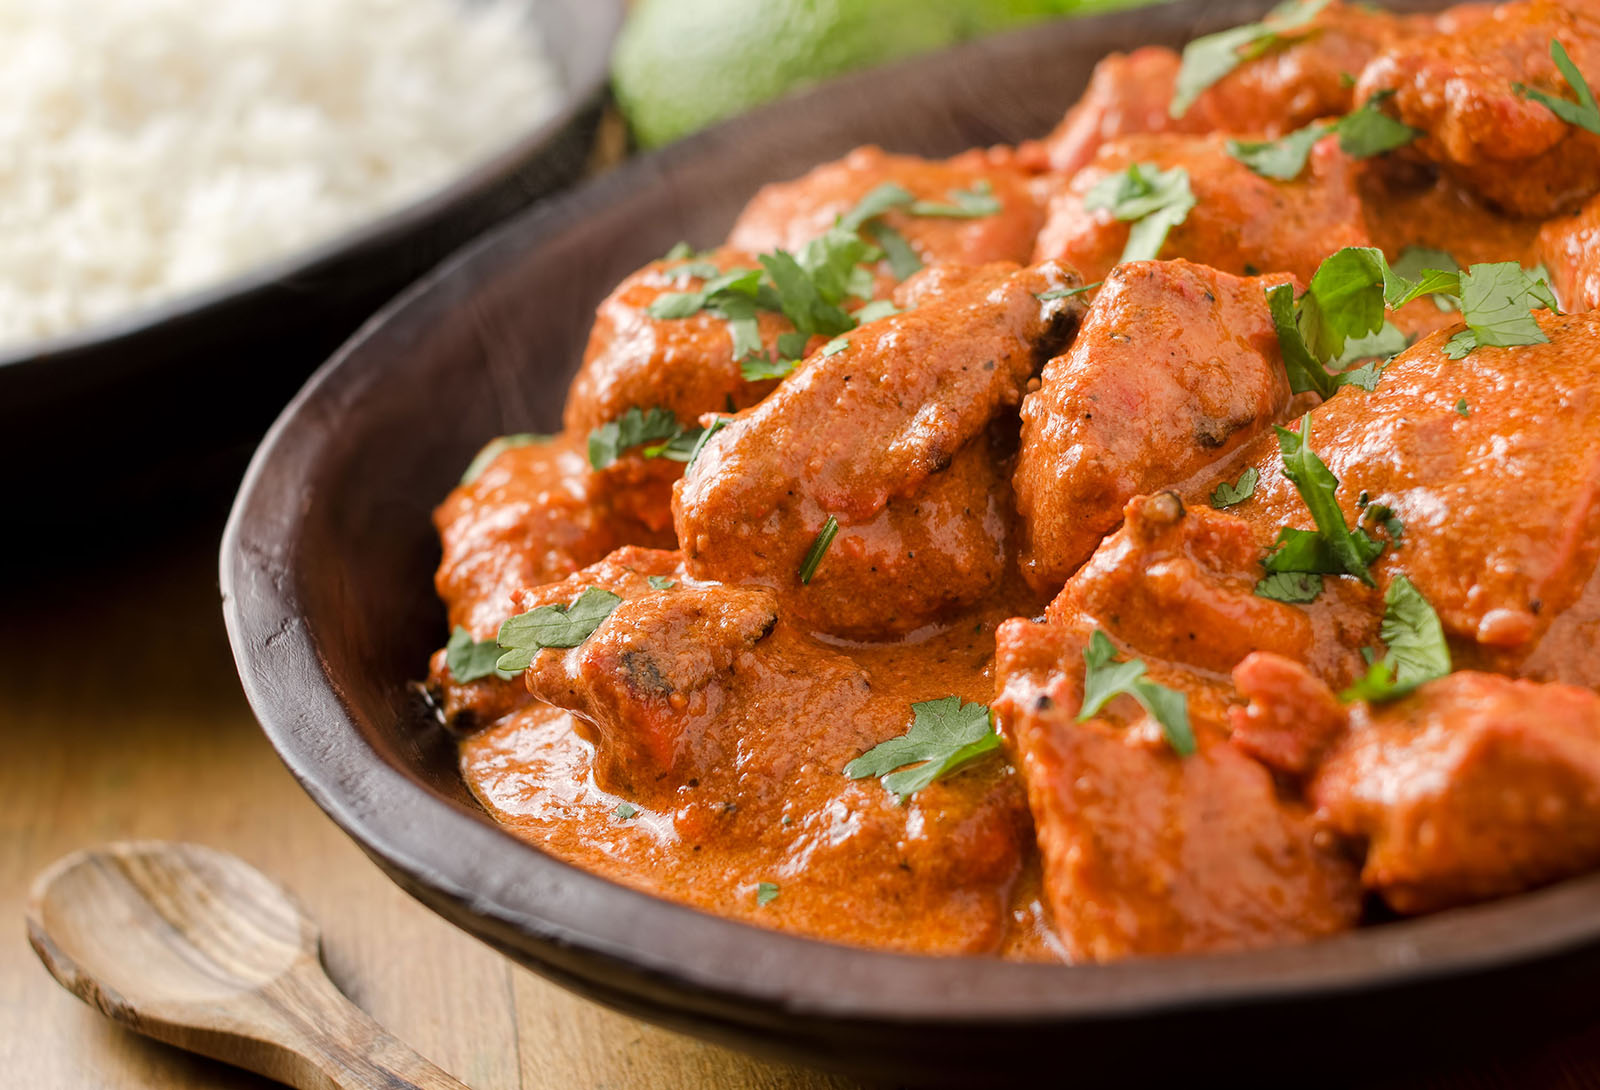 Butter chicken curry with basmati rice and limes.